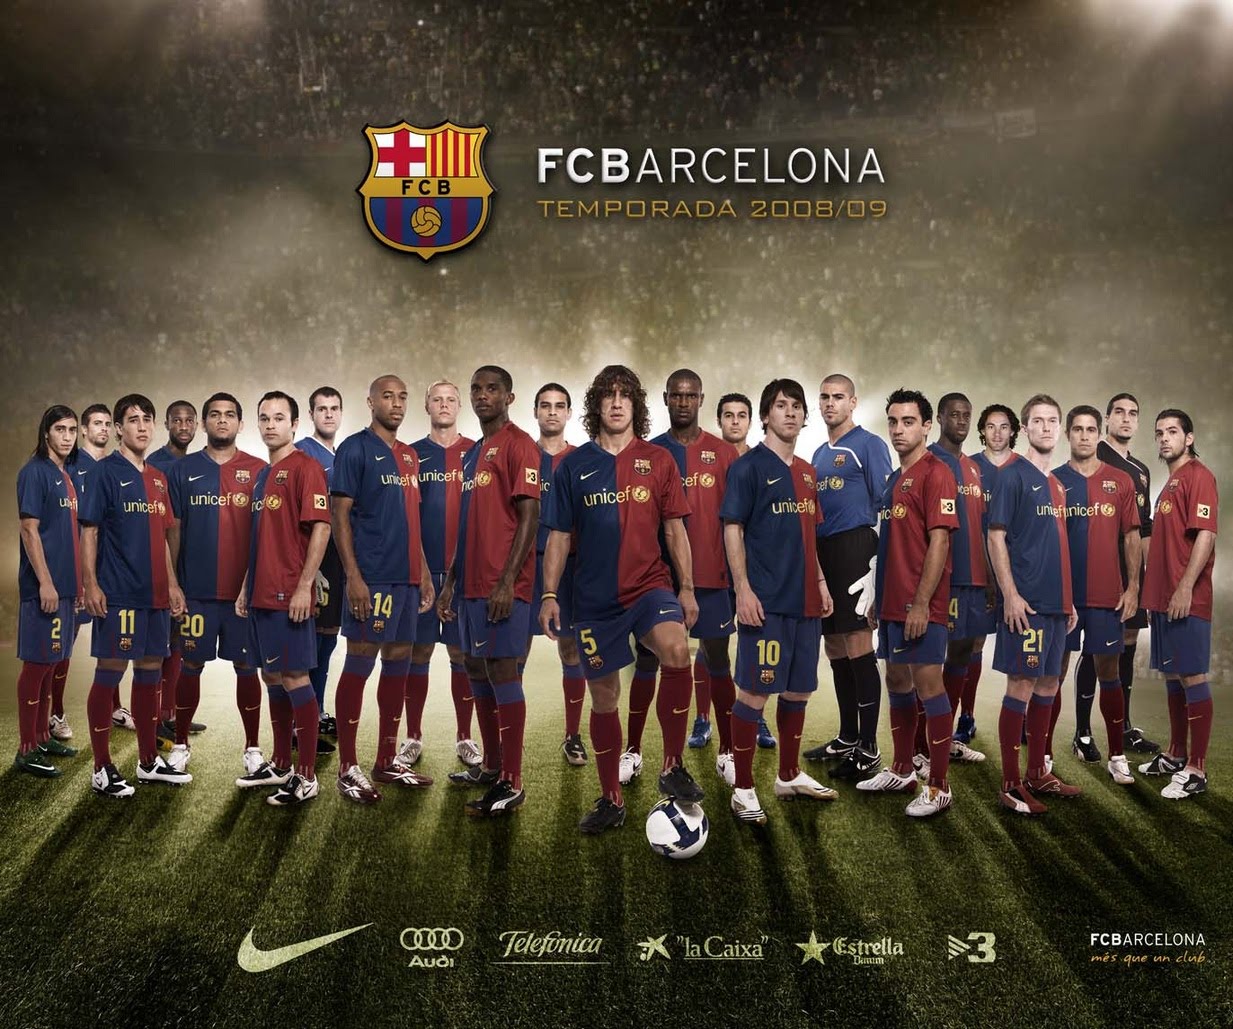 Free download SOCCER PLAYERS WALLPAPER 2010 2011 Barcelona Football Club Picture [1233x1029] for your Desktop, Mobile & Tablet. Explore Football Players Wallpaper. Sick Football Wallpaper, NFL Football Players Wallpaper, Football HD Wallpaper